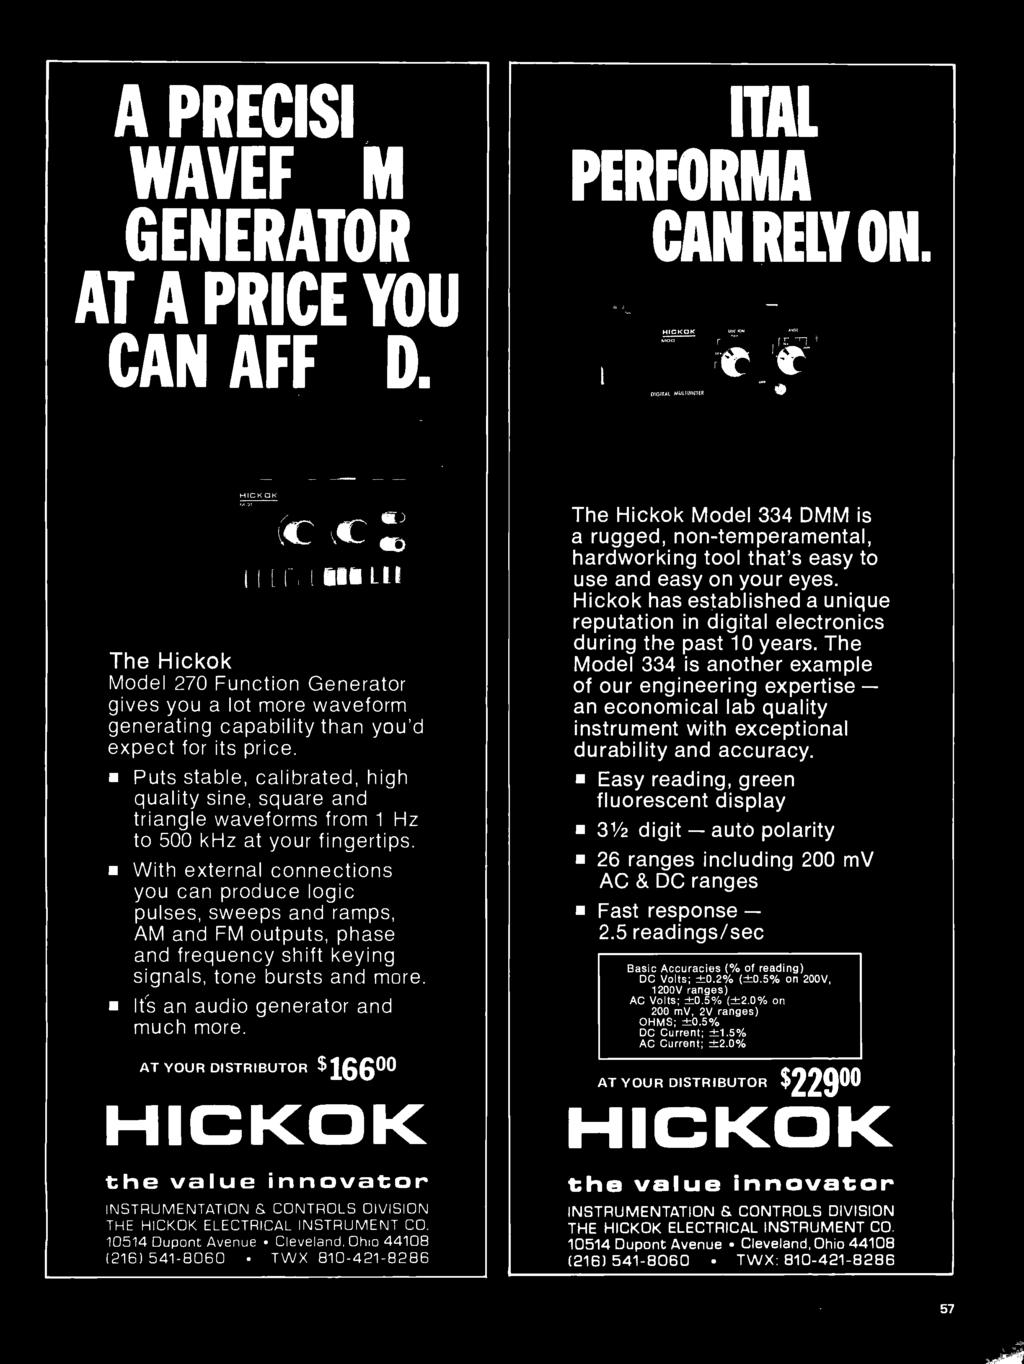 AT YOUR DISTRIBUTOR $16600 HICKOK the value innovator INSTRUMENTATION & CONTROLS DIVISION THE HICKOK ELECTRICAL INSTRUMENT CO 10514 Dupont Avenue Cleveland, Ohio 44108 (216) 541-8060 TWX 810-421